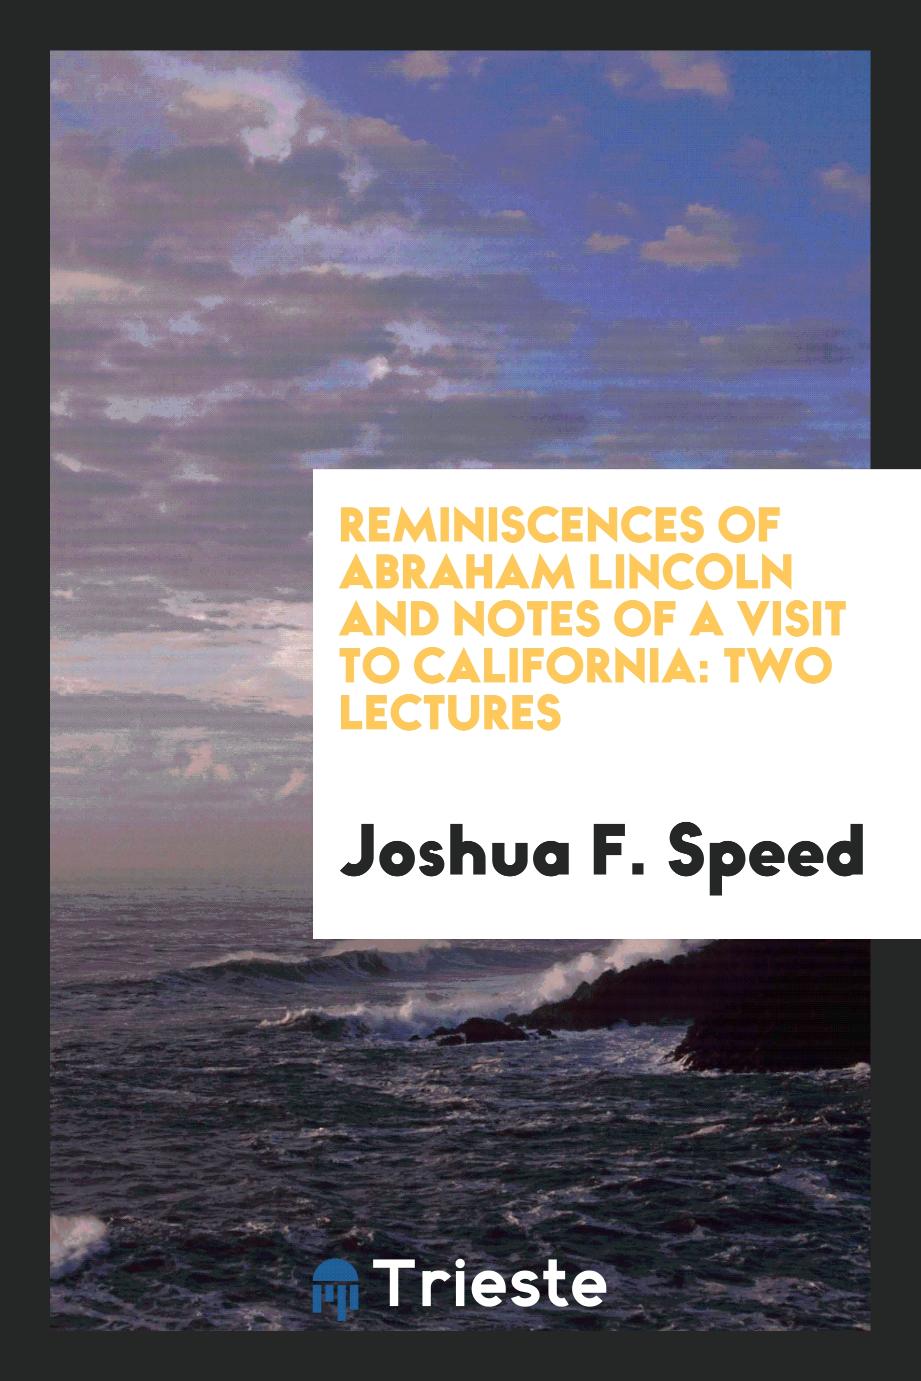 Reminiscences of Abraham Lincoln and Notes of a Visit to California: Two Lectures